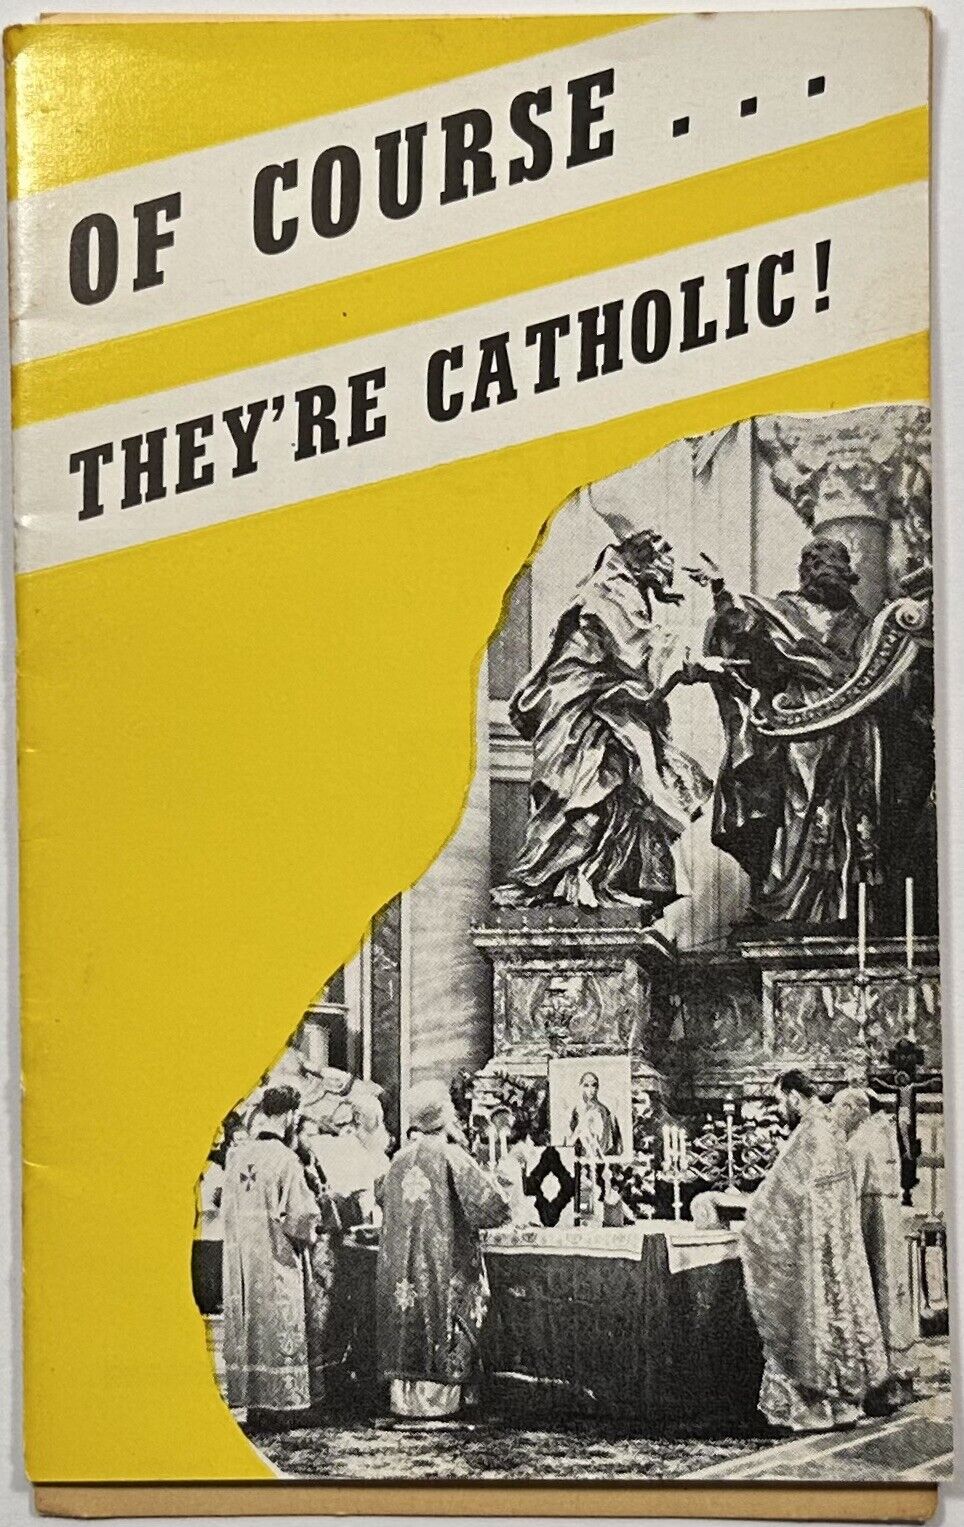 Of Course They’re Catholic, Vintage 1945 Holy Devotional Booklet.